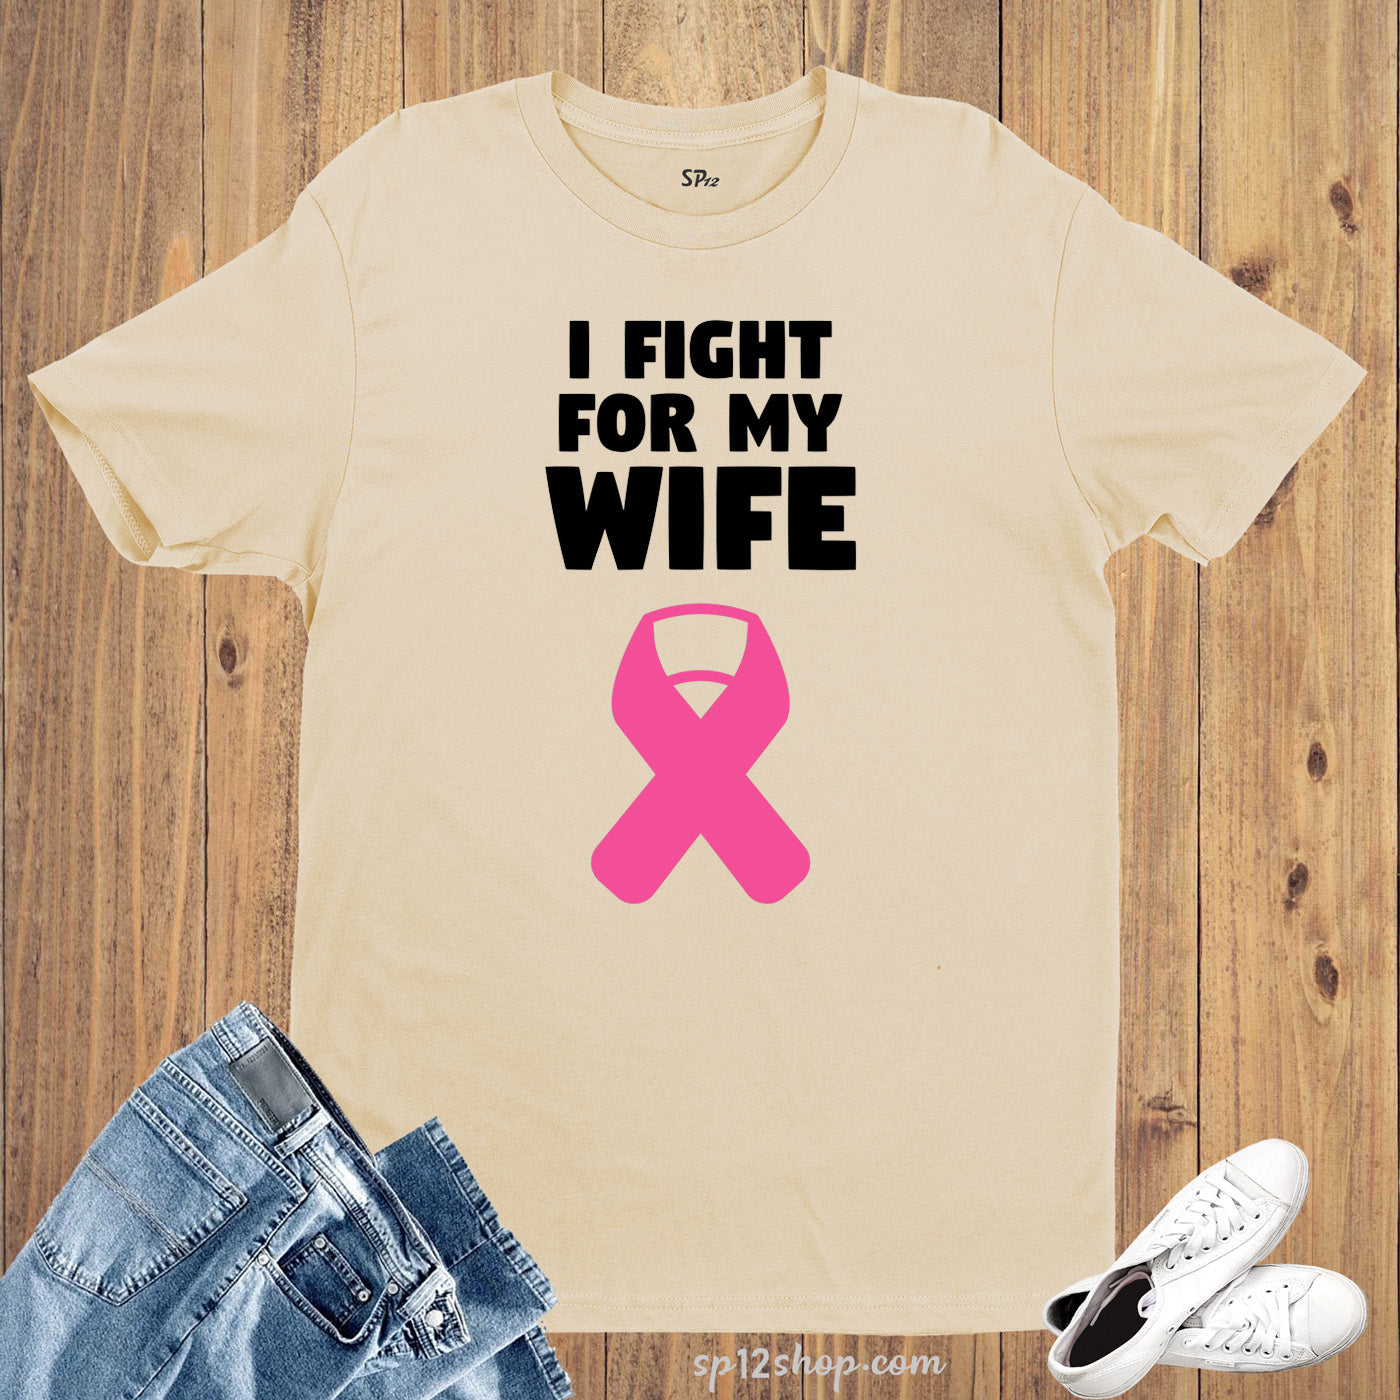 Breast Cancer Awareness Charity T shirt I FIGHT FOR MY WIFE